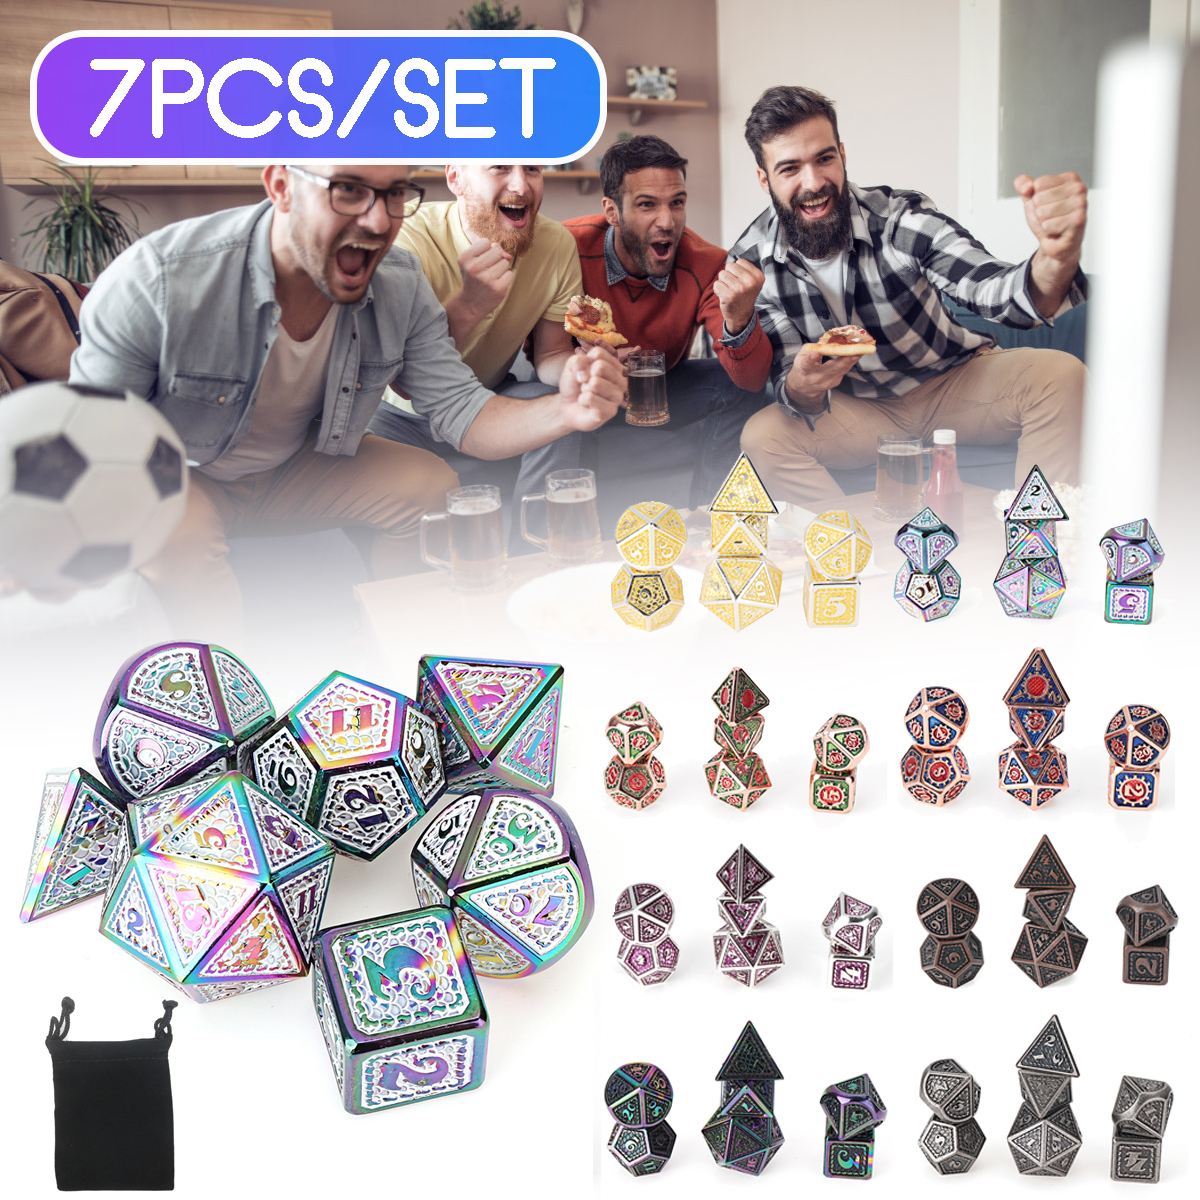 Beutiful-Color-Metal-Polyhedral-Dice-Multi-side-Dice-Set-For-DND-RPG-MTG-Role-Playing-Board-Game-Wit-1716609-2